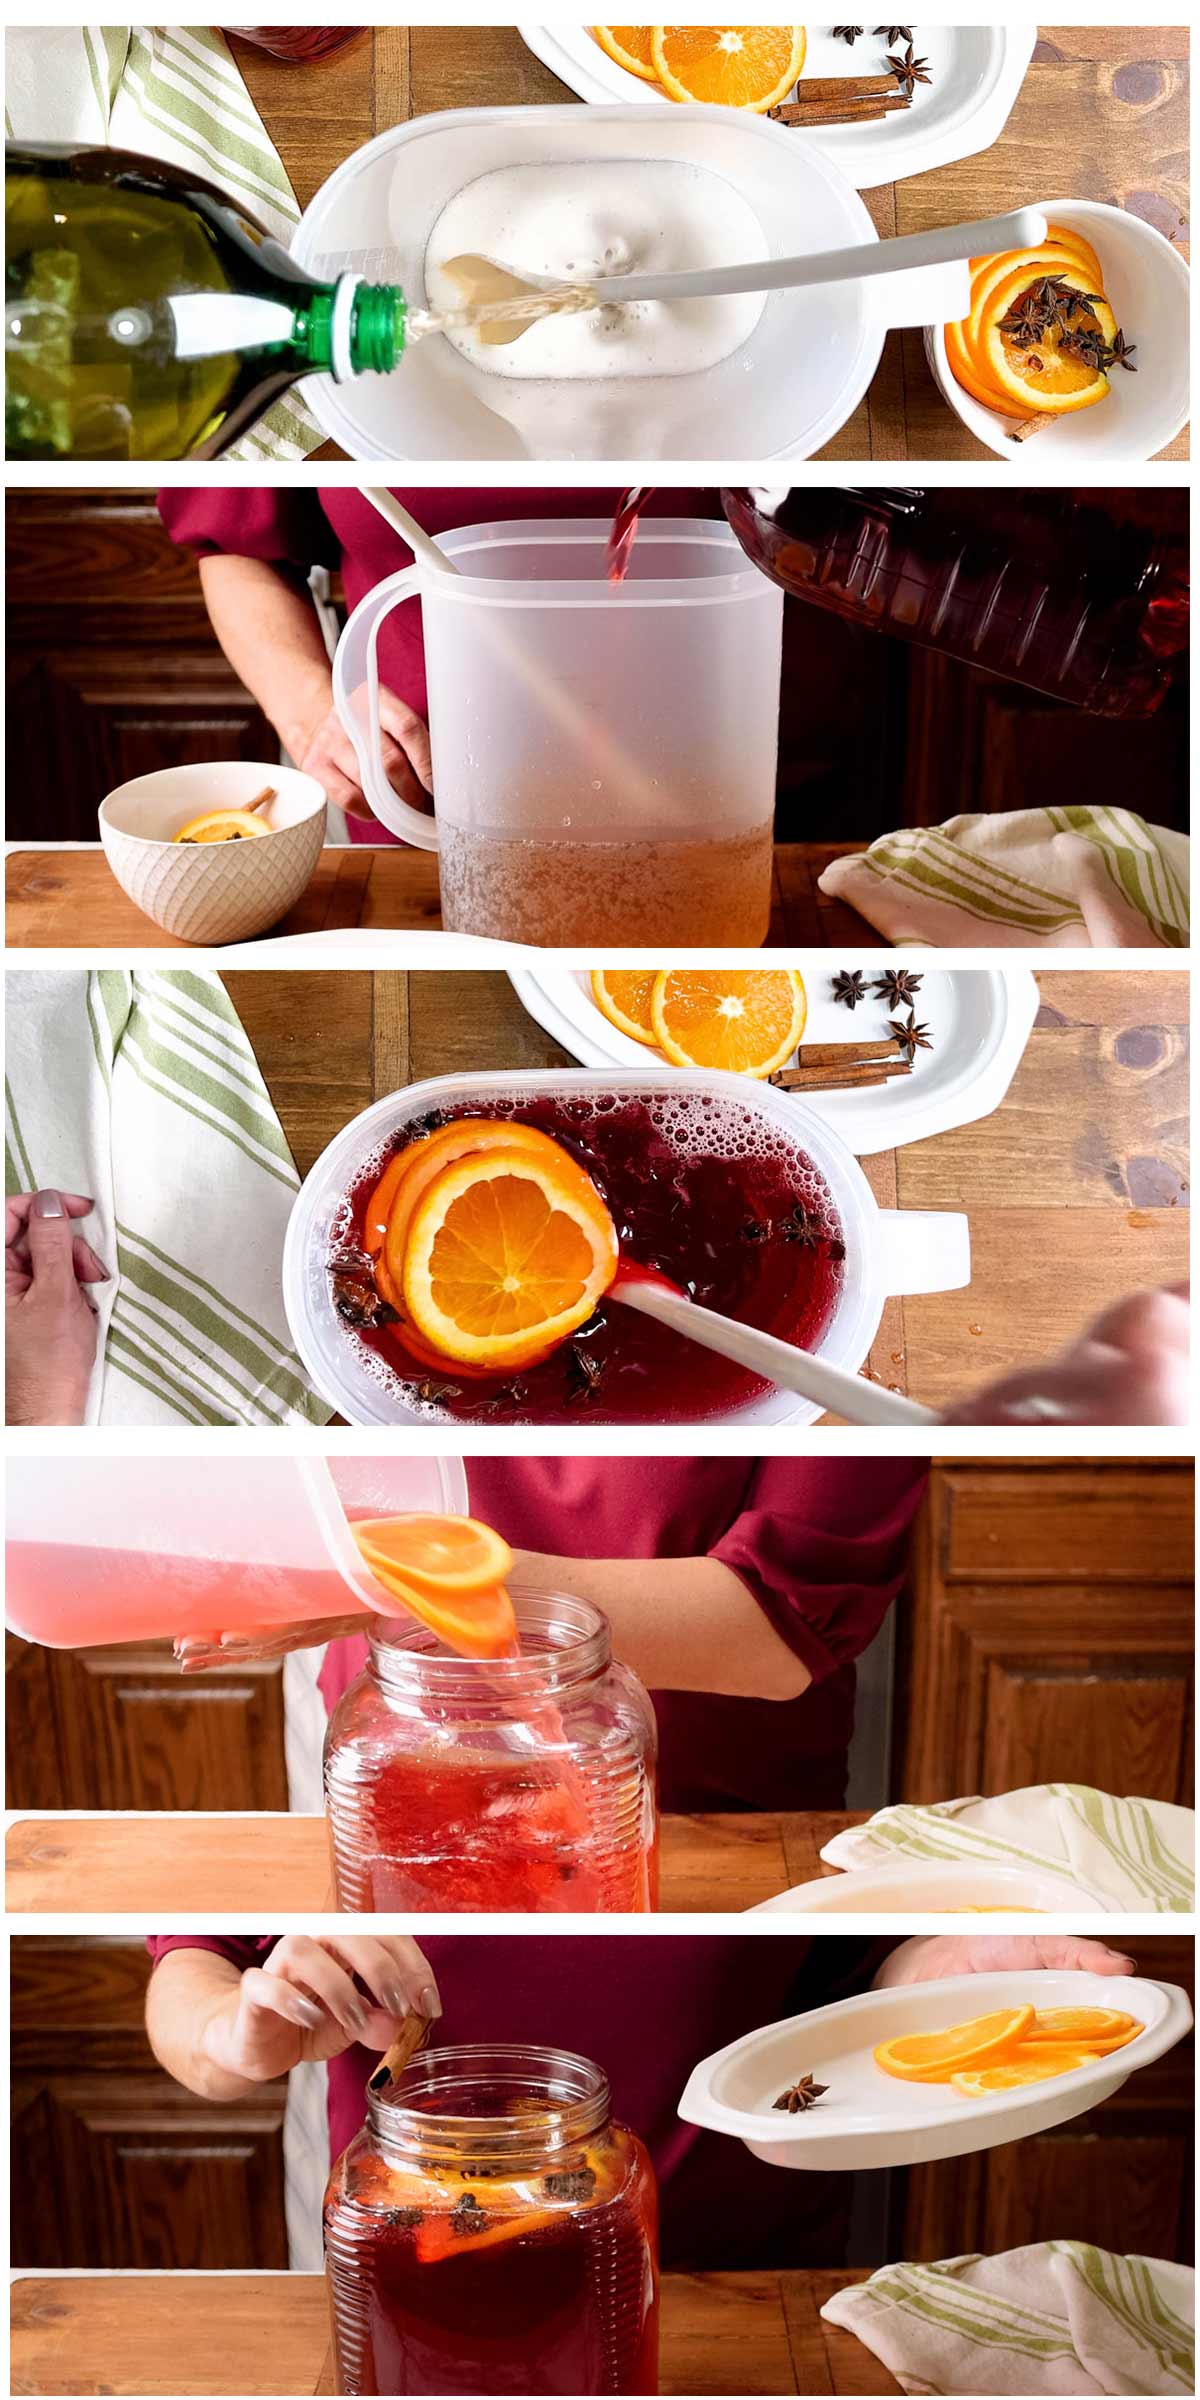 A collage of 5 photos showing the steps of making a Christmas punch of cranberry juice and ginger ale. It shows ginger ale being poured into a pitcher, followed by cranberry juice, then orange slices, star anise and cinnamon sticks. 